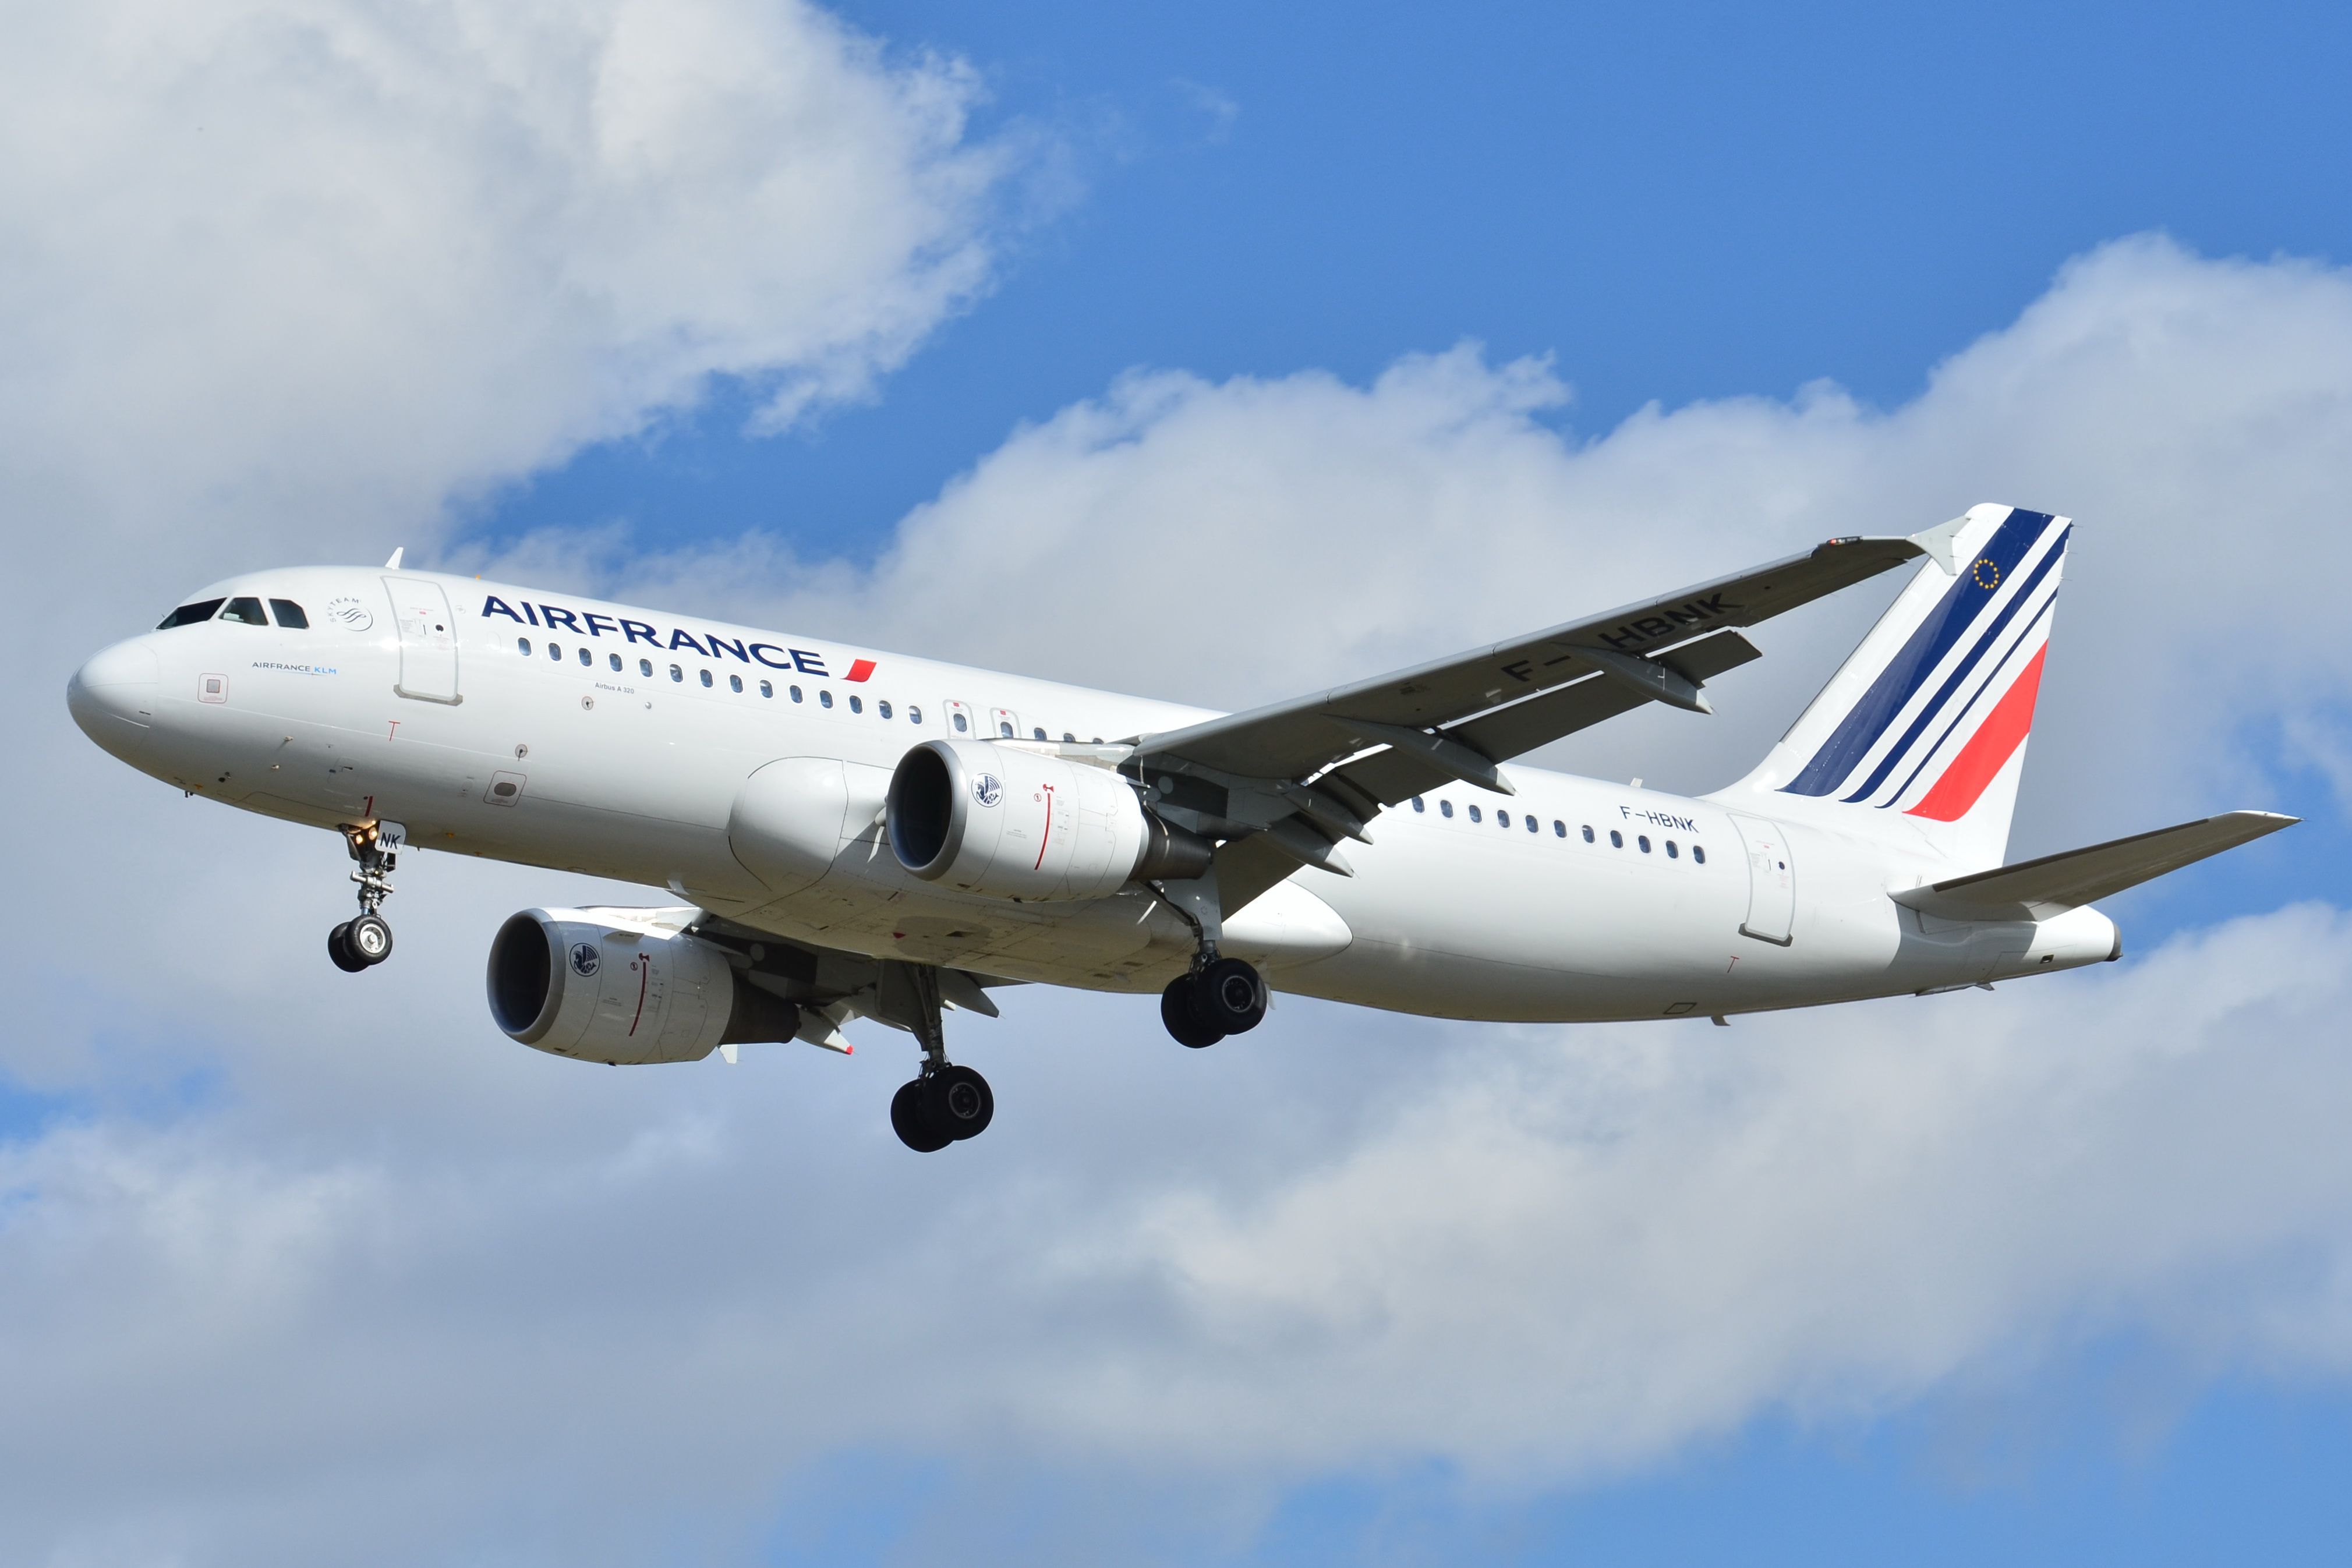 Airbus_A320-200_Air_France_(AFR)_F-HBNK with sharklets